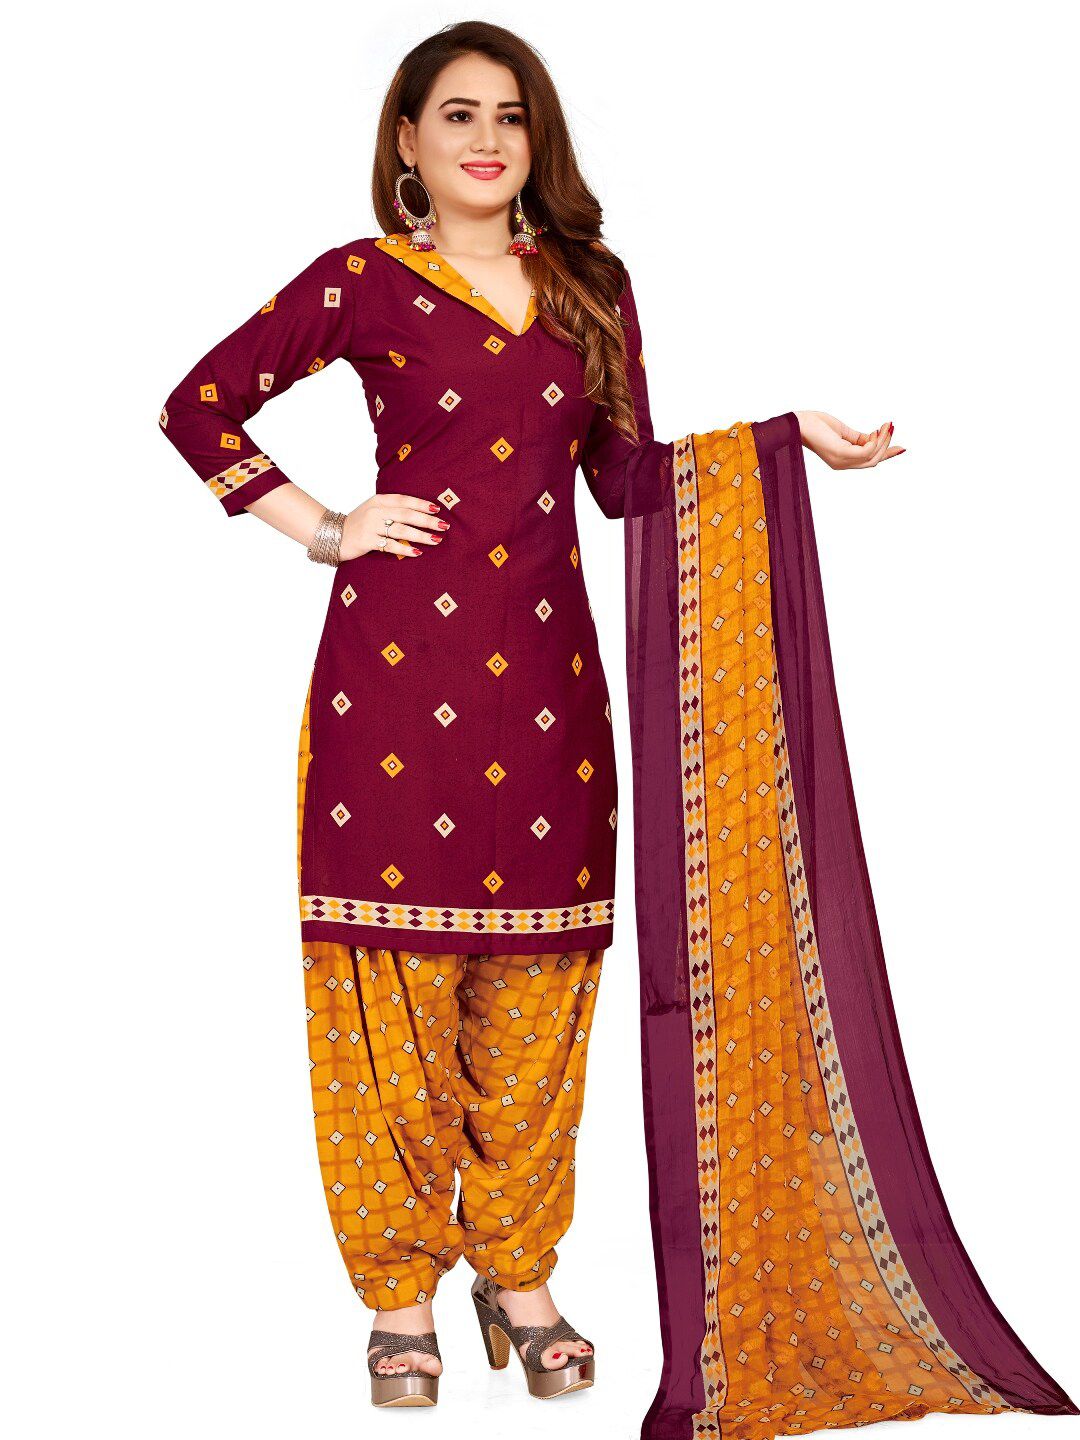 INDIAN HERITAGE Maroon & Mustard Printed Silk Crepe Unstitched Dress Material Price in India